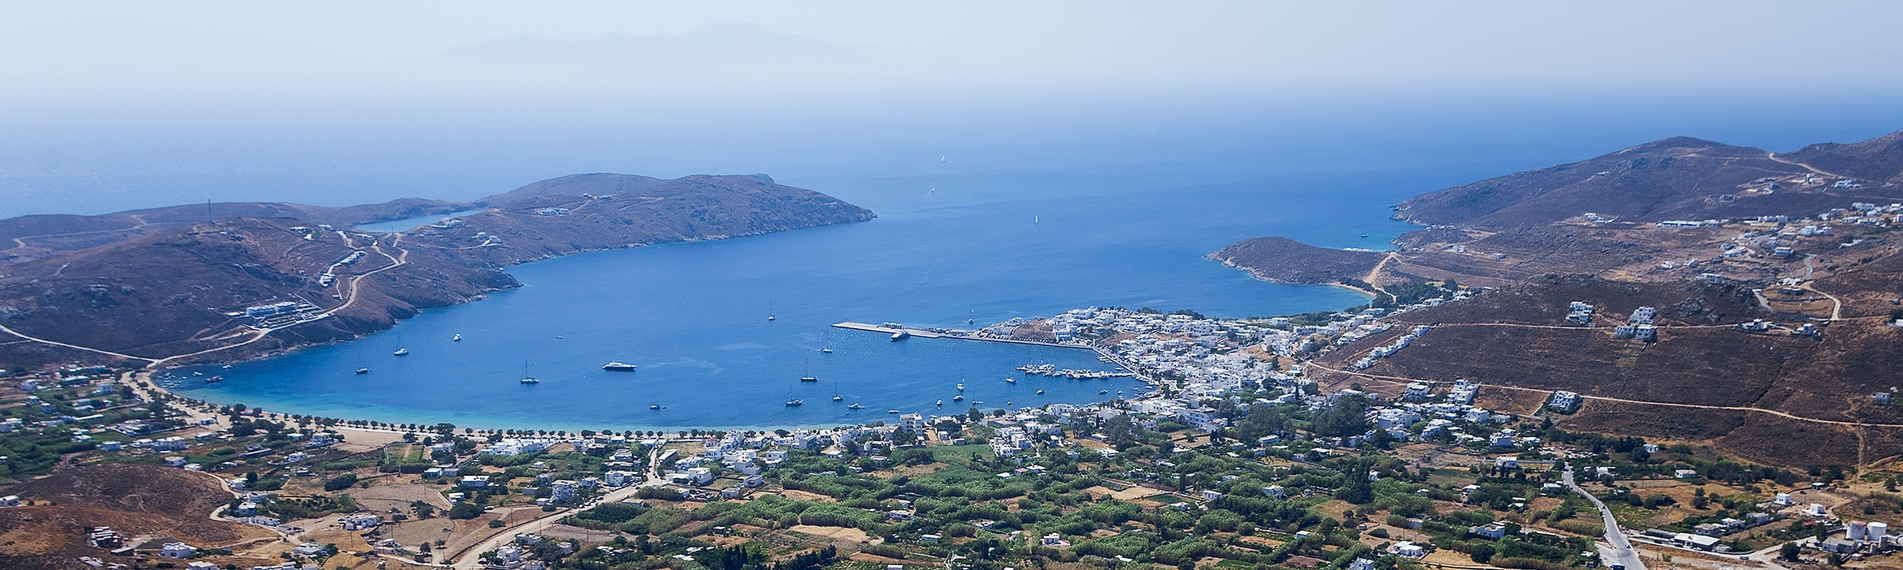 View of the Gulf of Serifos in the Cyclades islands